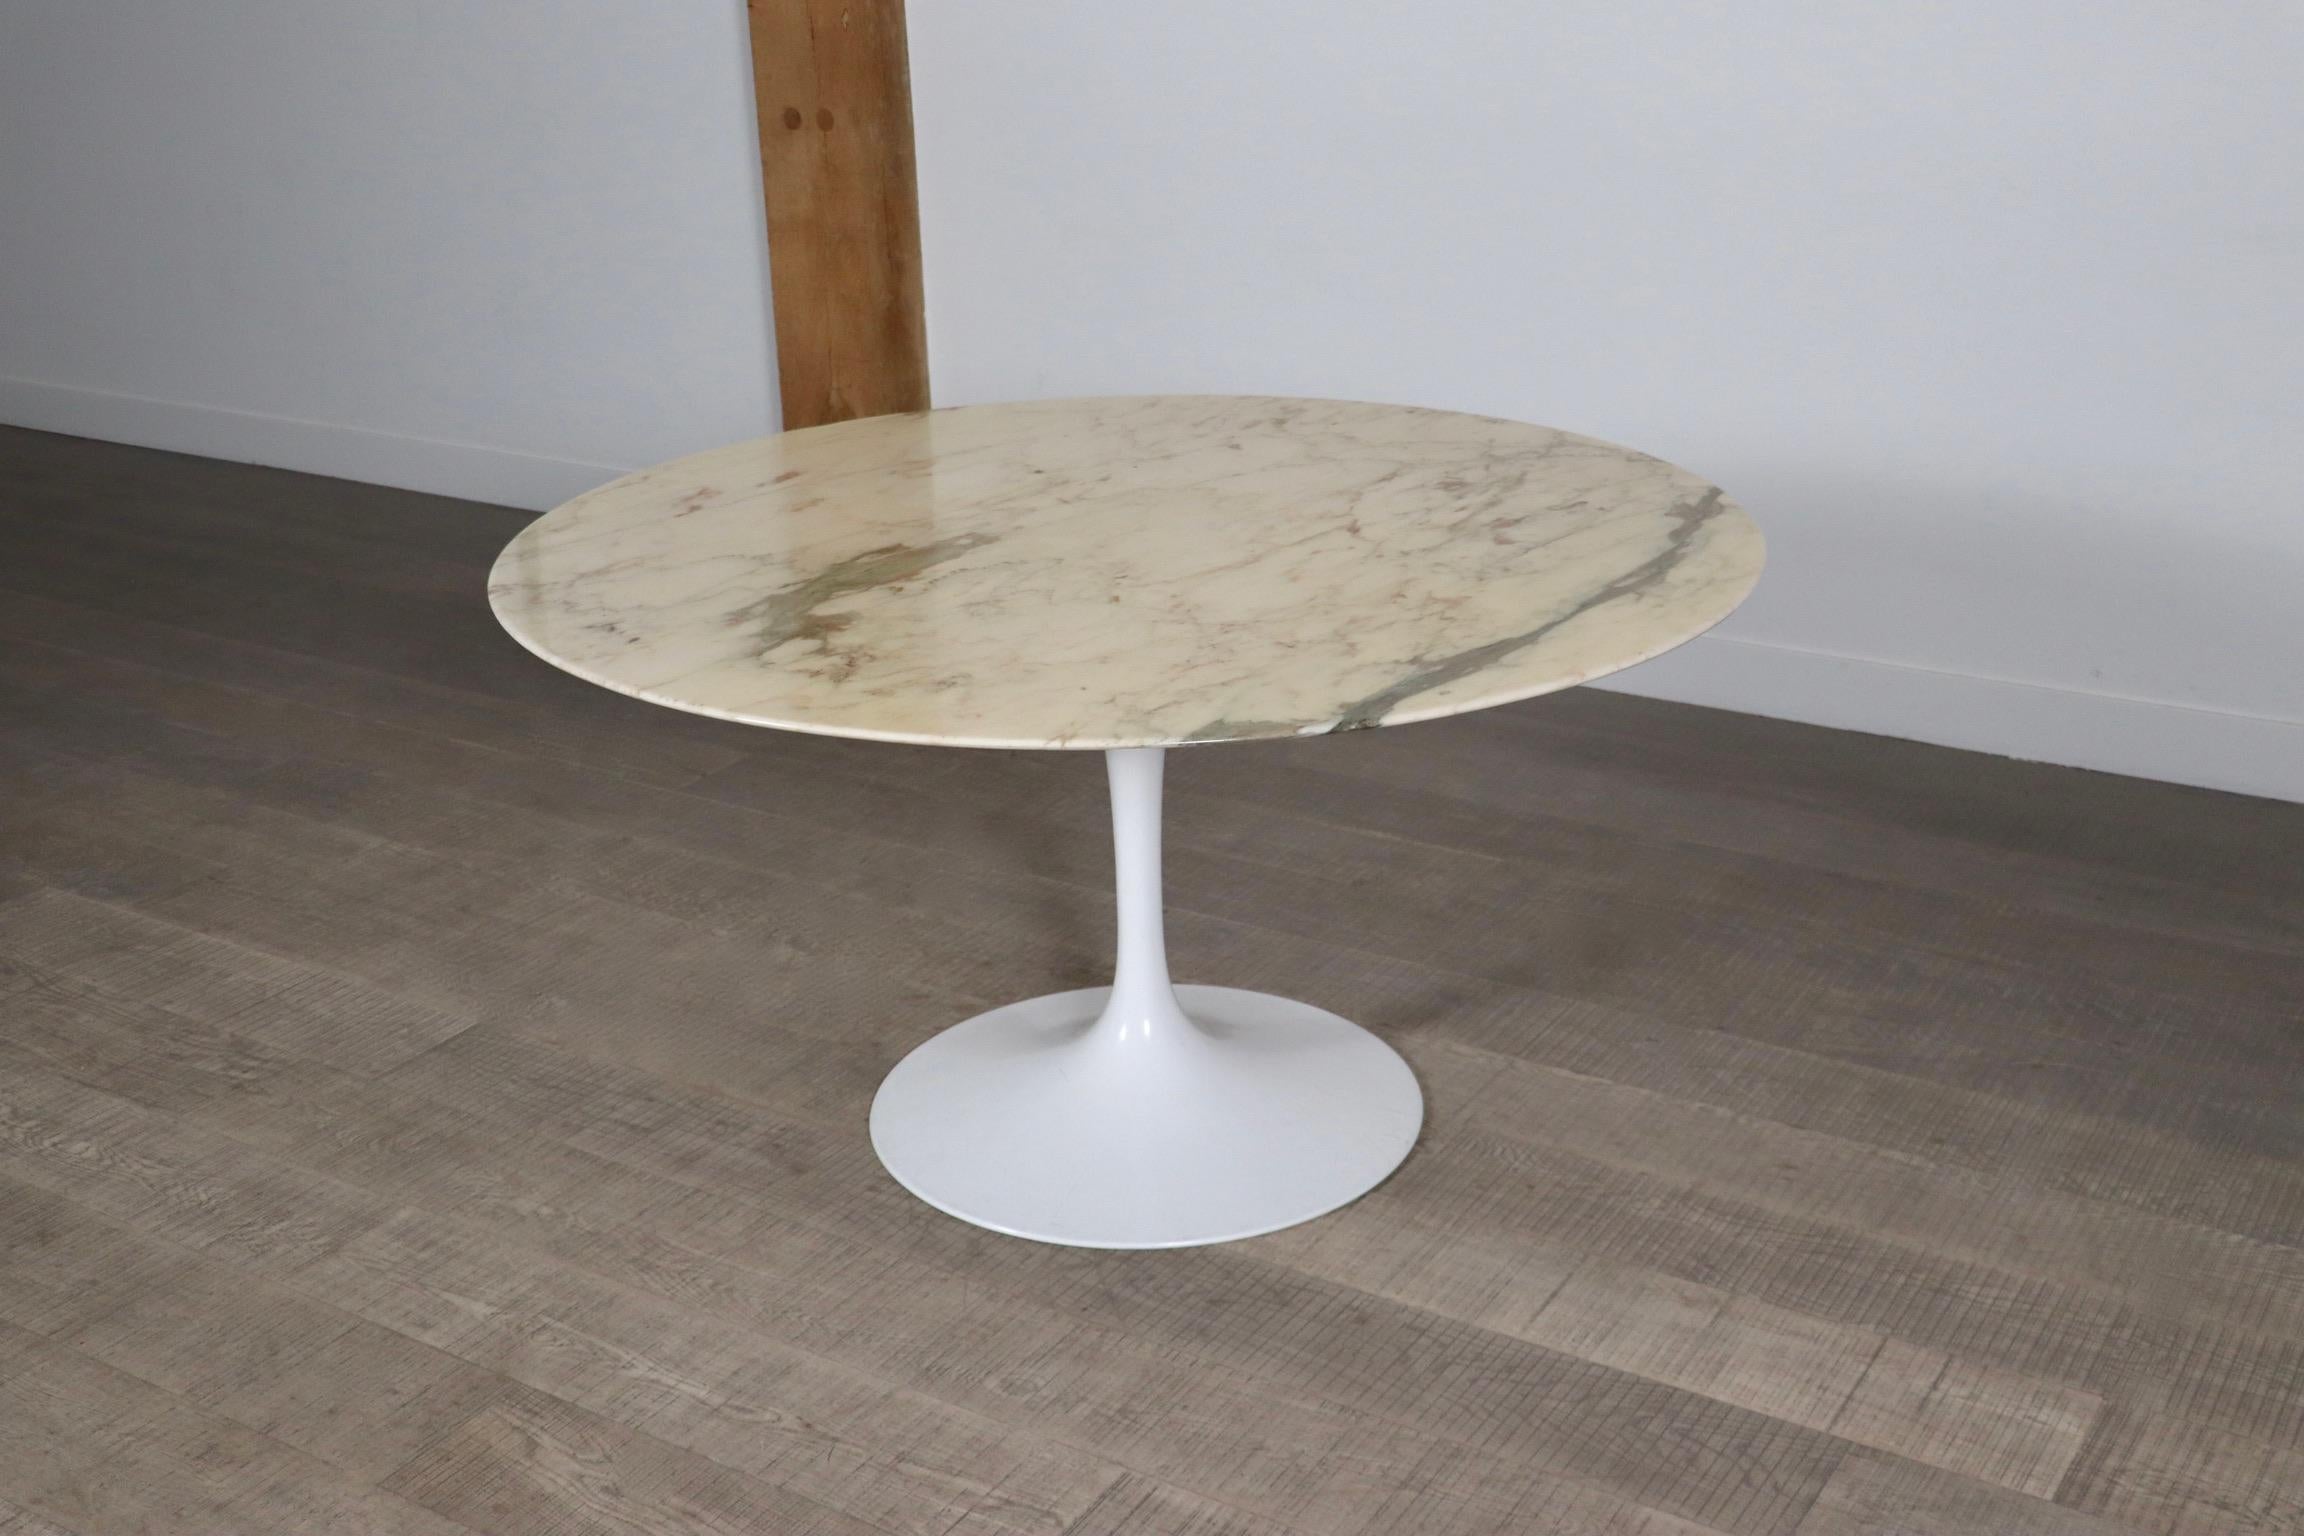 Vintage Round Marble Tulip Dining Table By Eero Saarinen For Knoll, 1970s 1